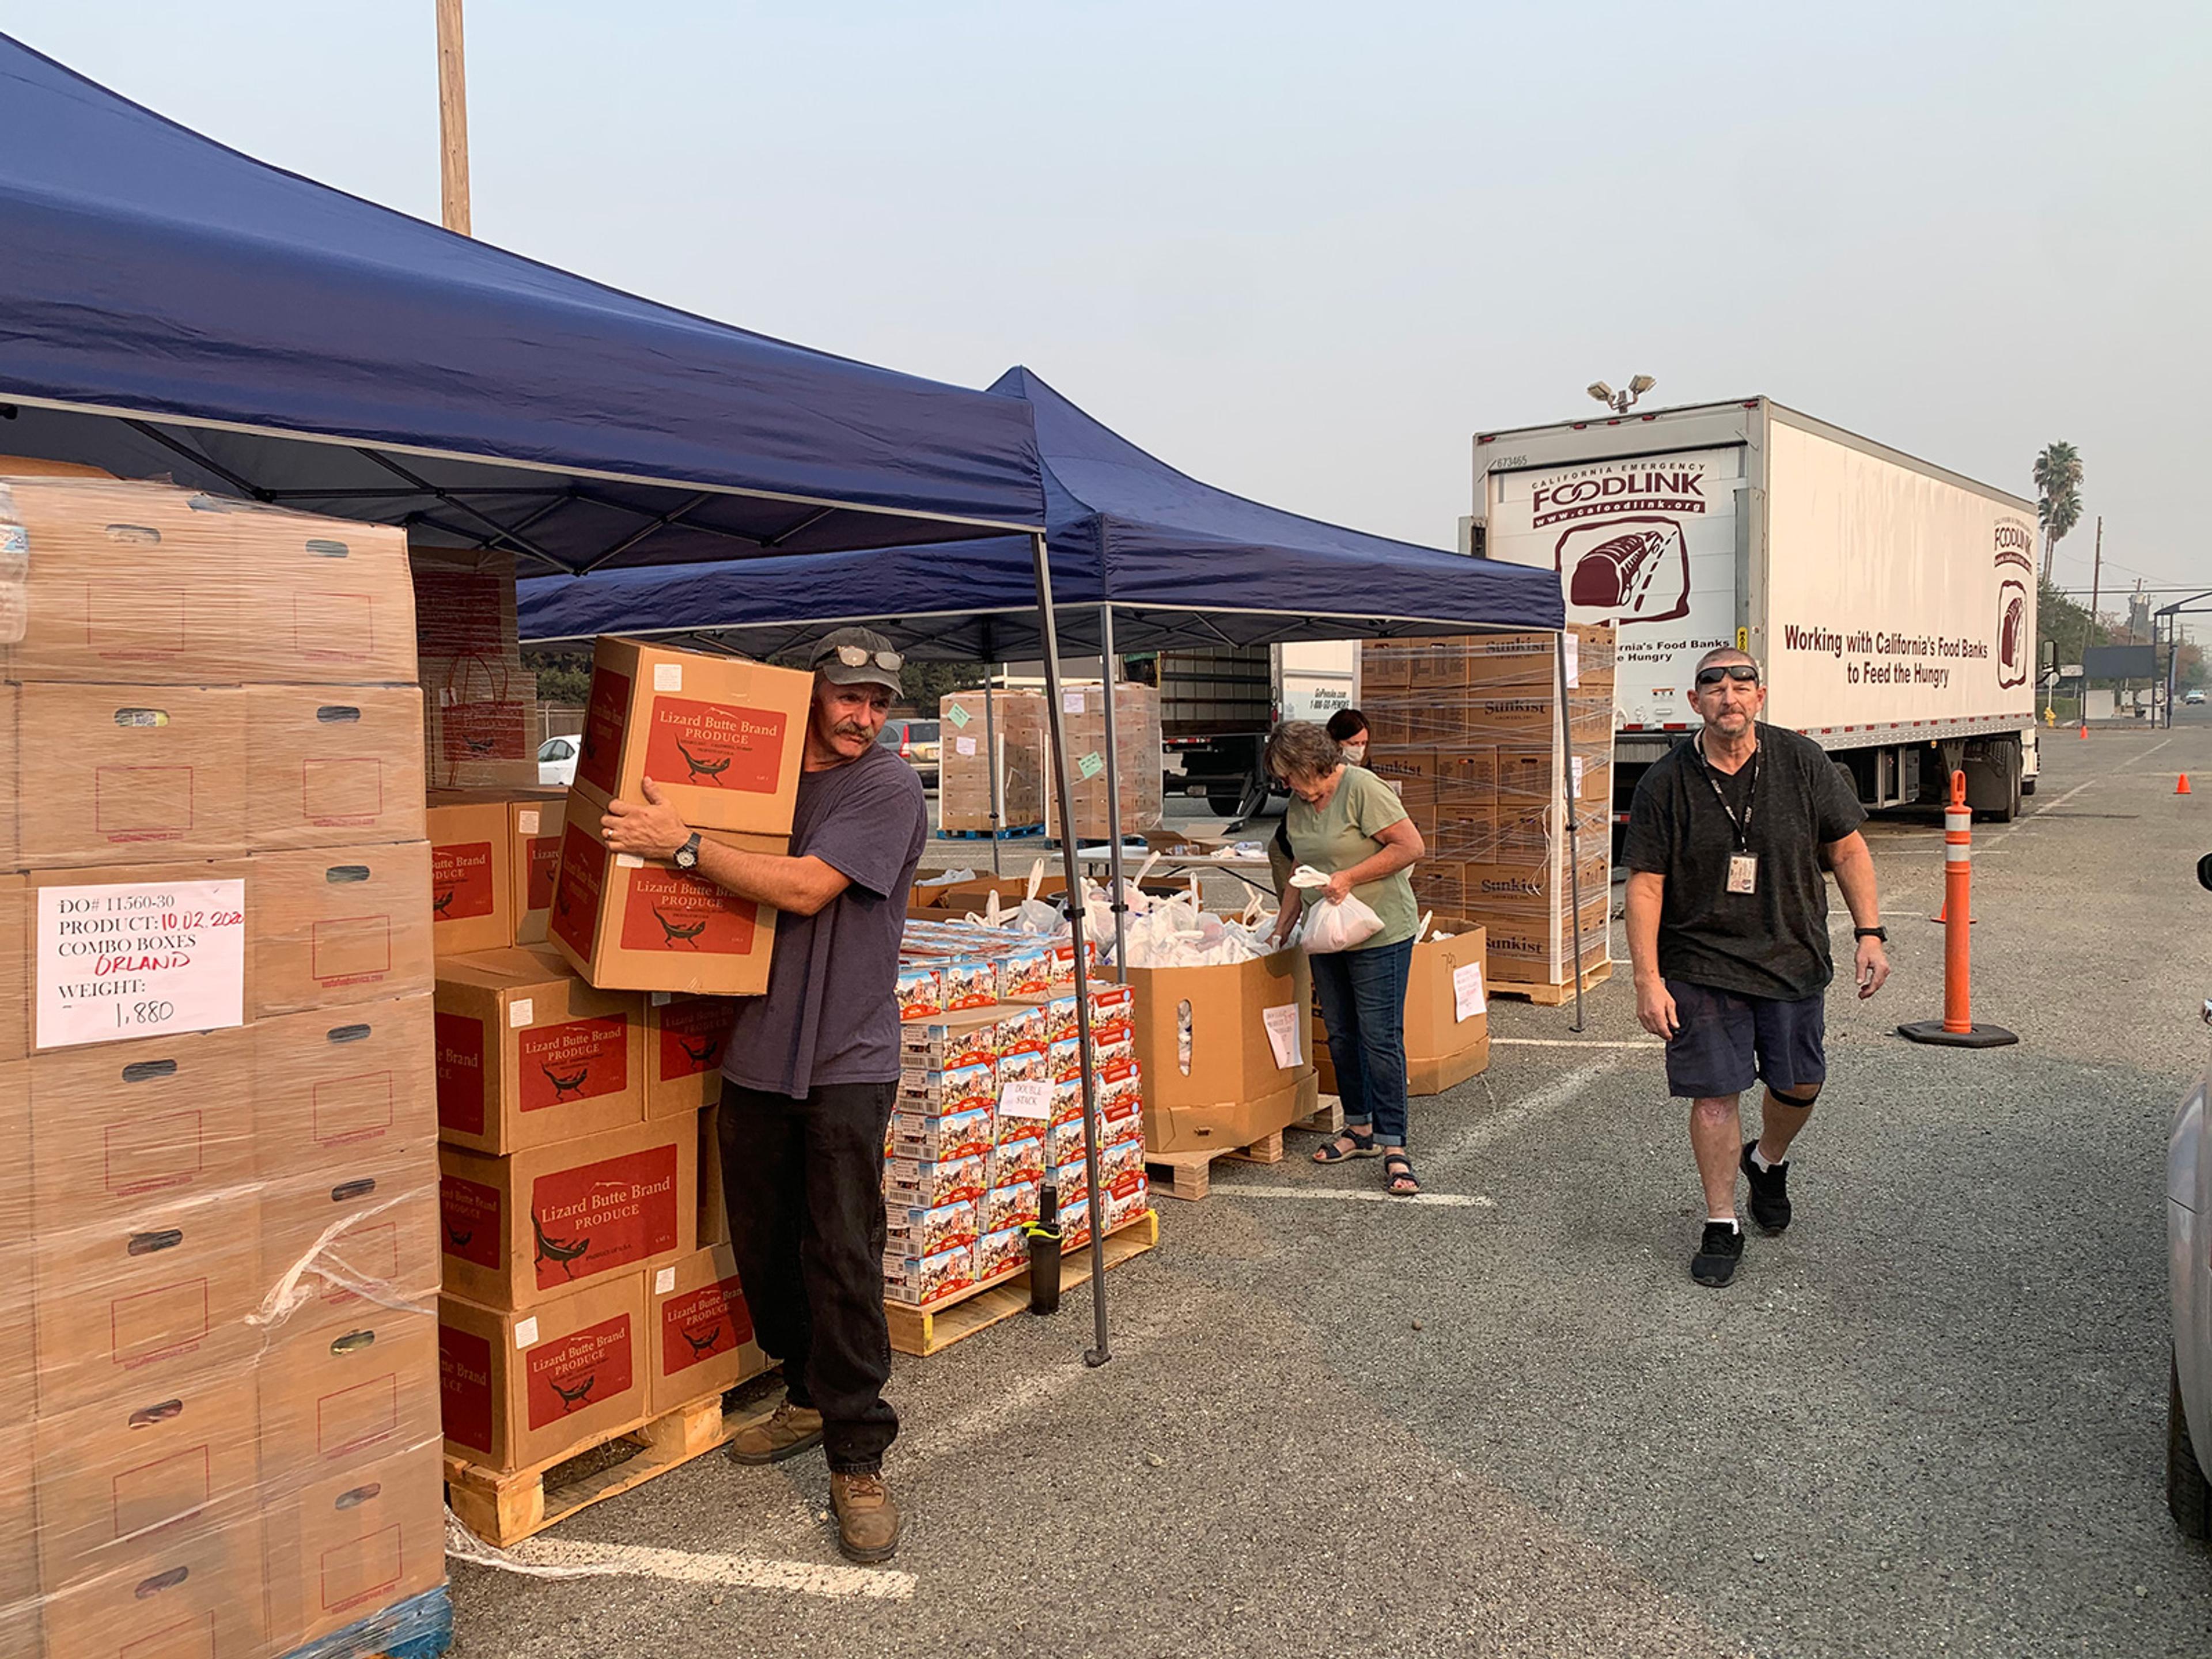 Volunteers share goods and food with community members affecting by the wildfires.